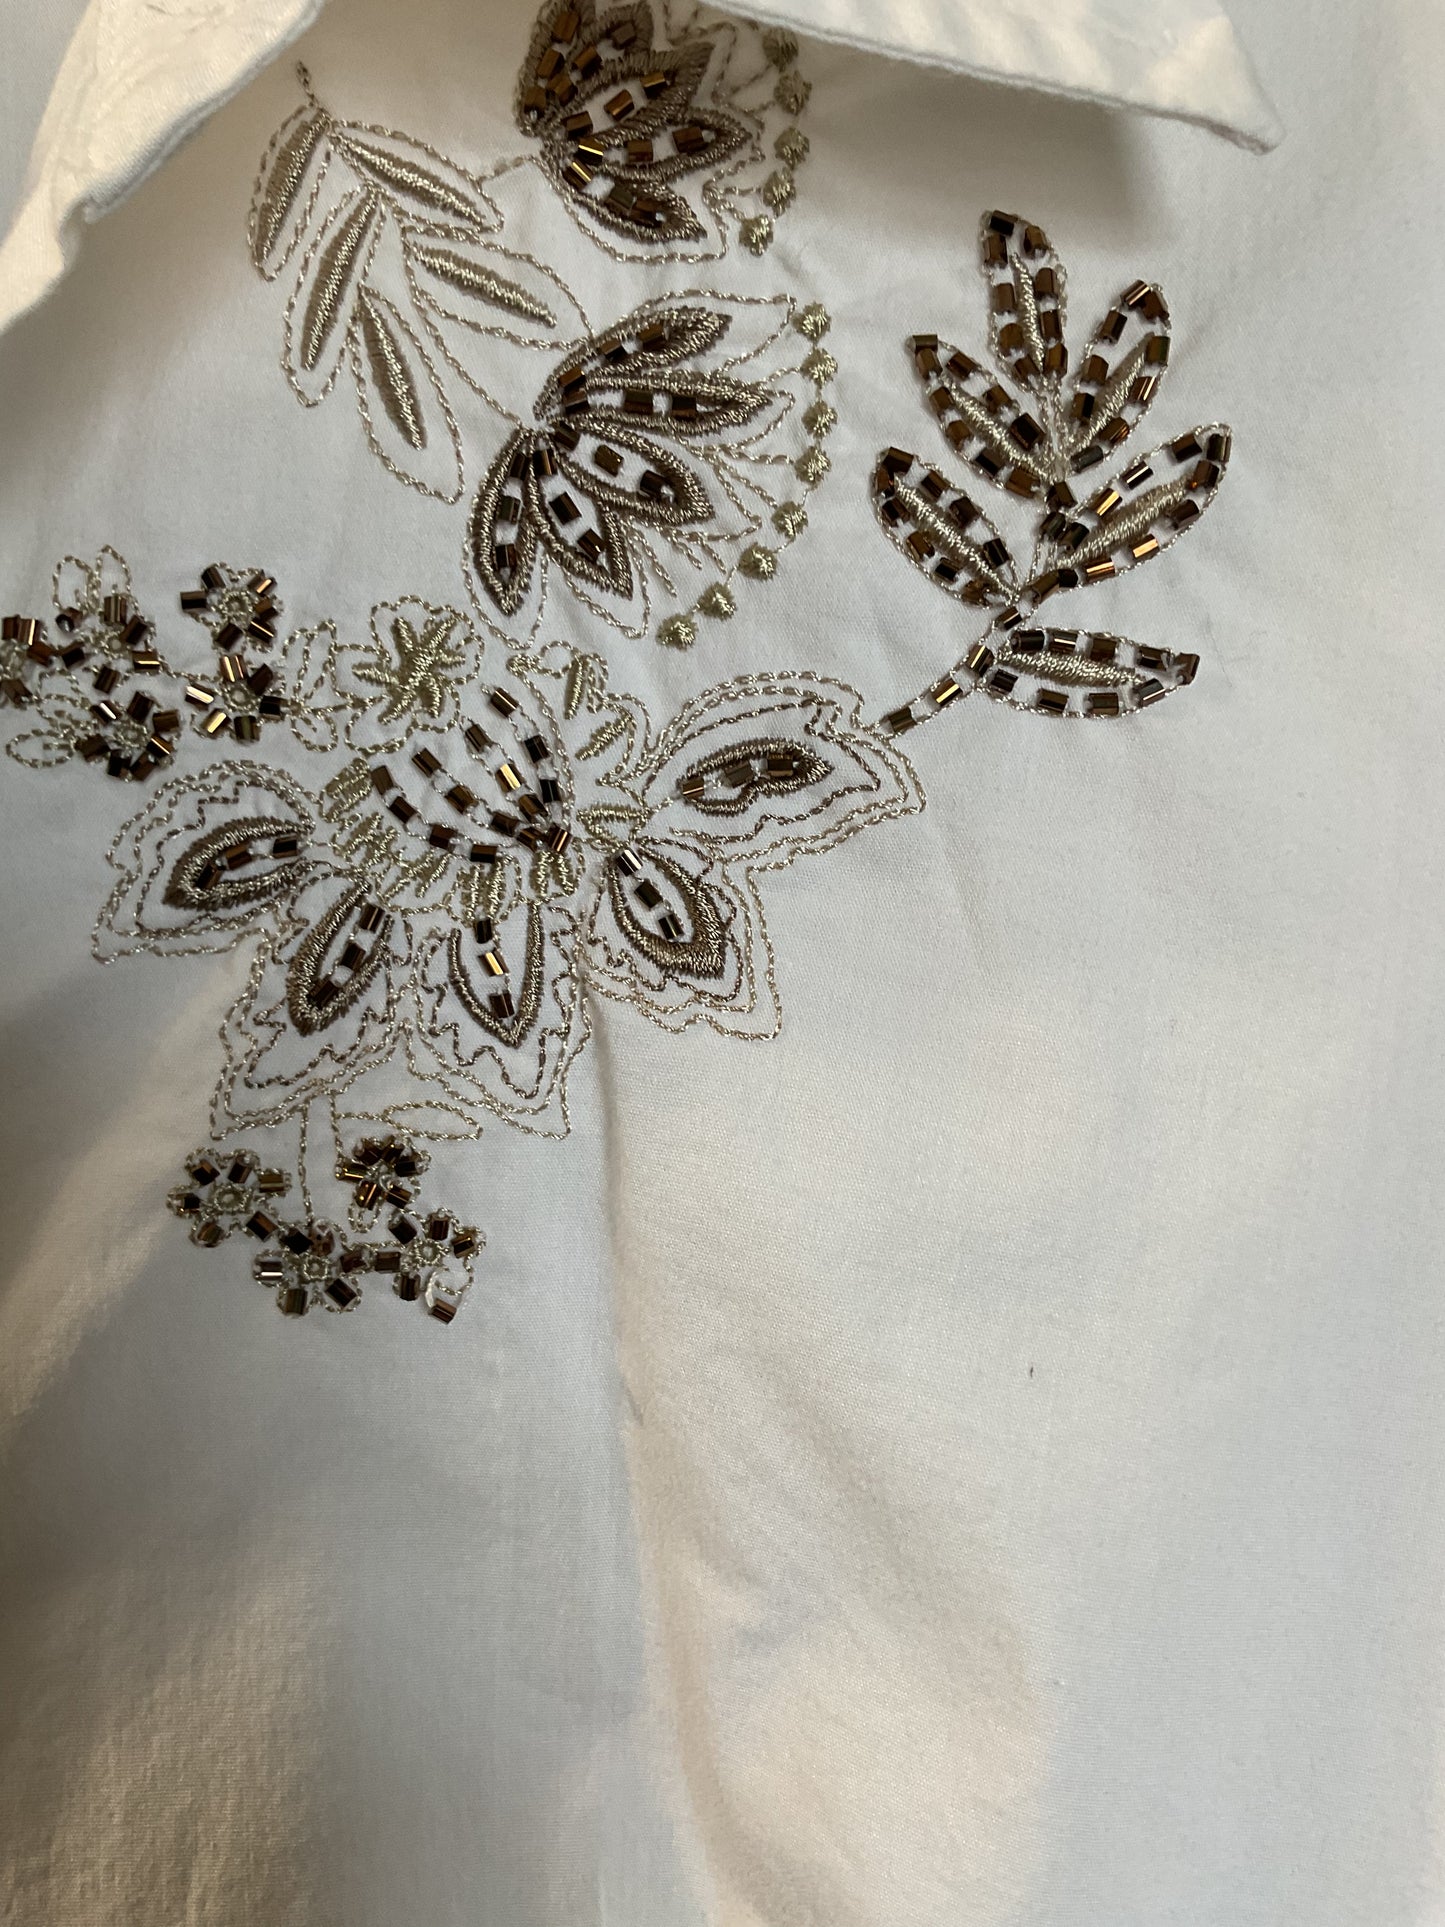 Petite Sophisticated Embroidered Blouse Size 4P